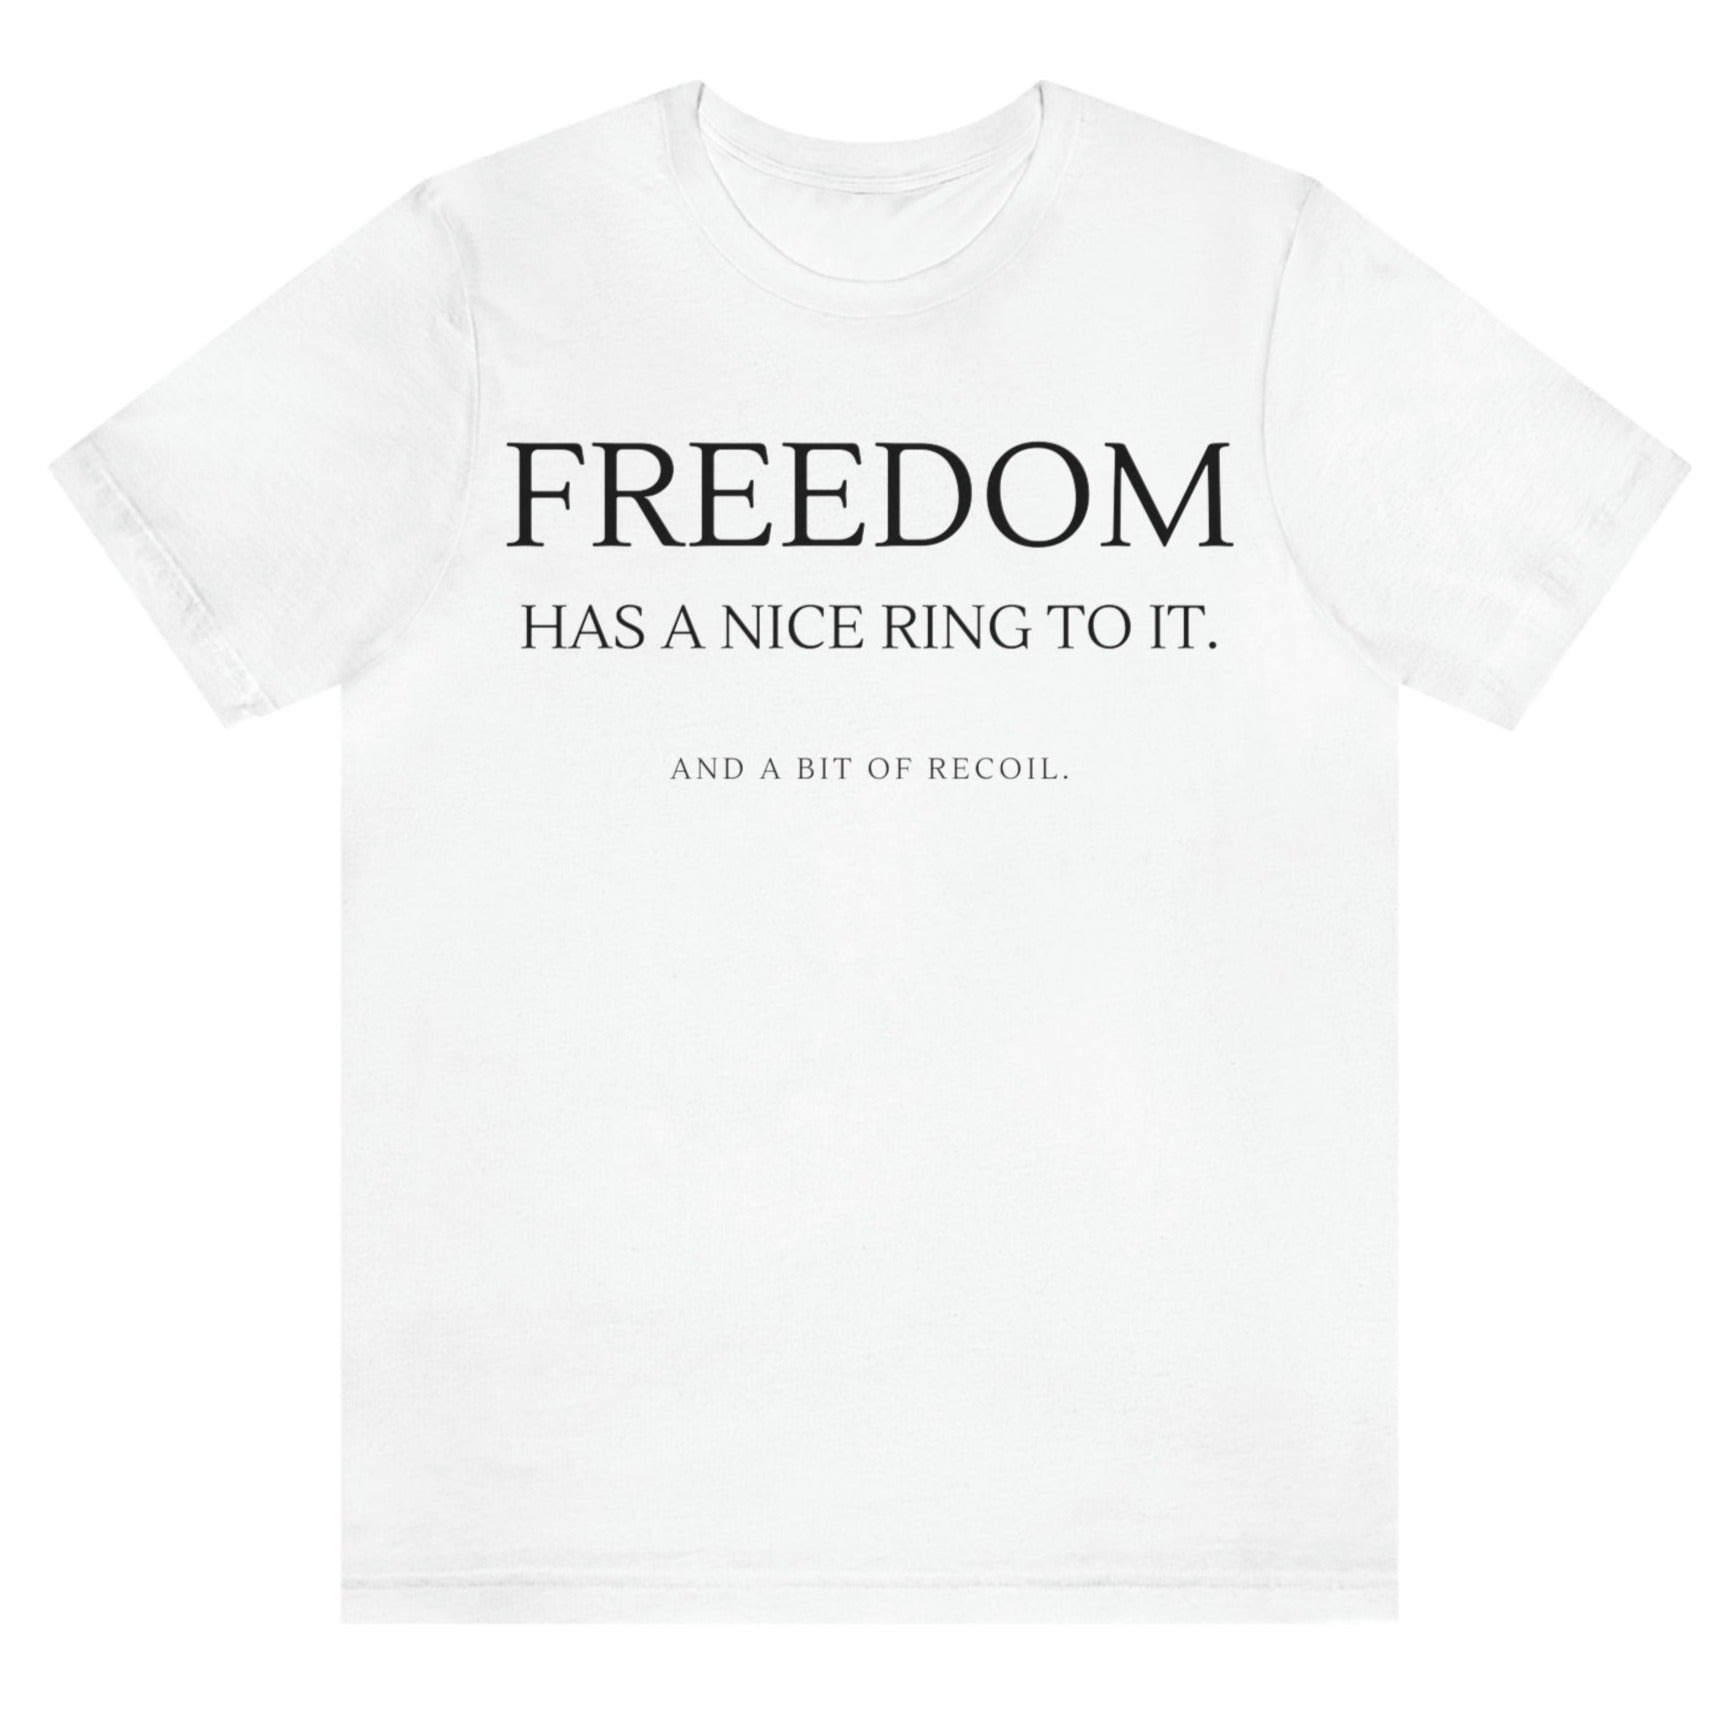 freedom-has-a-nice-ring-to-it-and-a-bit-of-recoil-white-t-shirt-2a